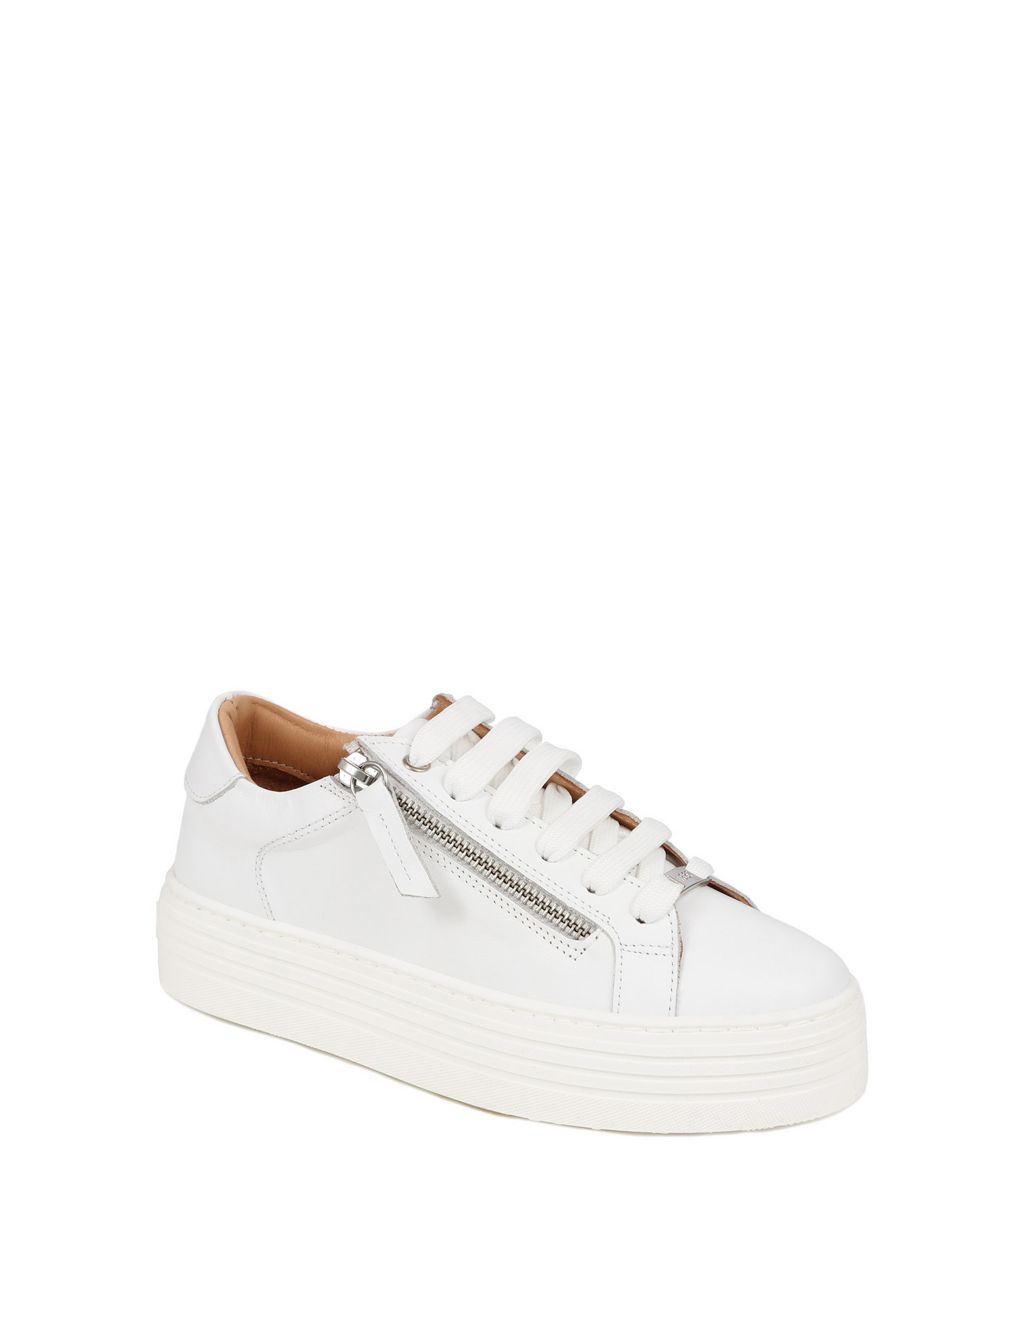 Leather Lace Up Flatform Trainers image 4